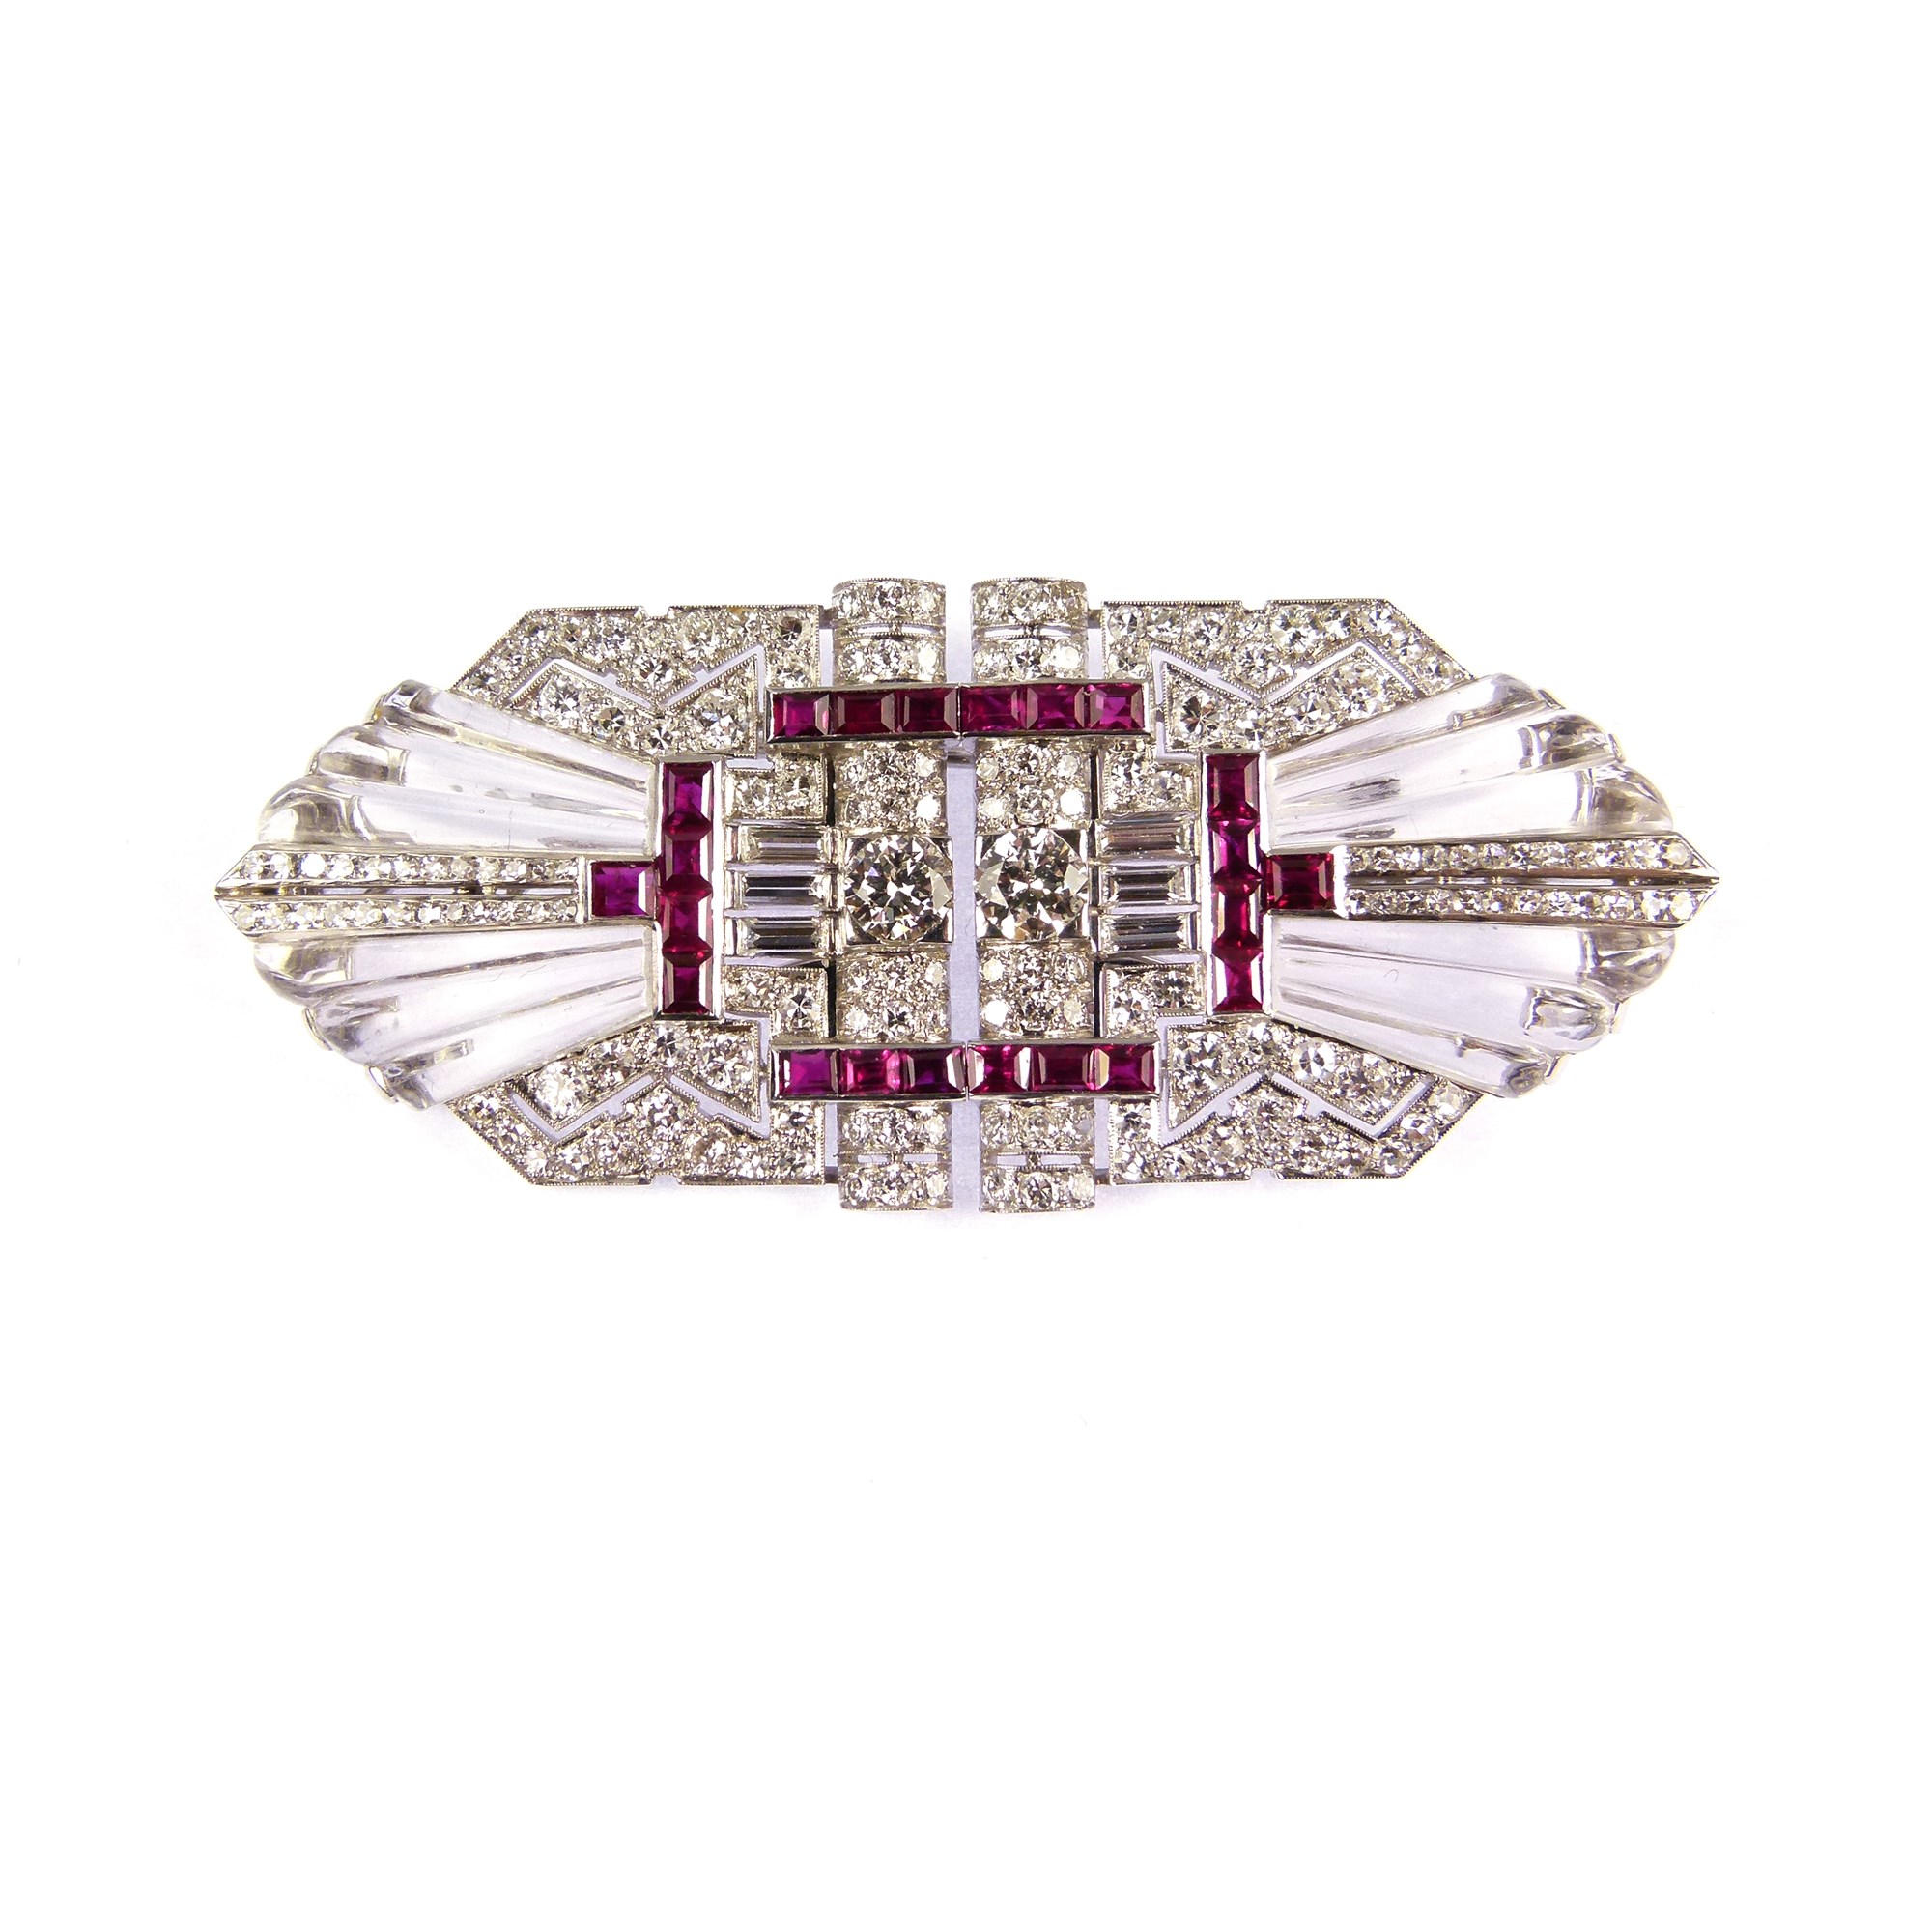 Diamond, ruby and carved rock crystal double clip brooch, | Object | S ...